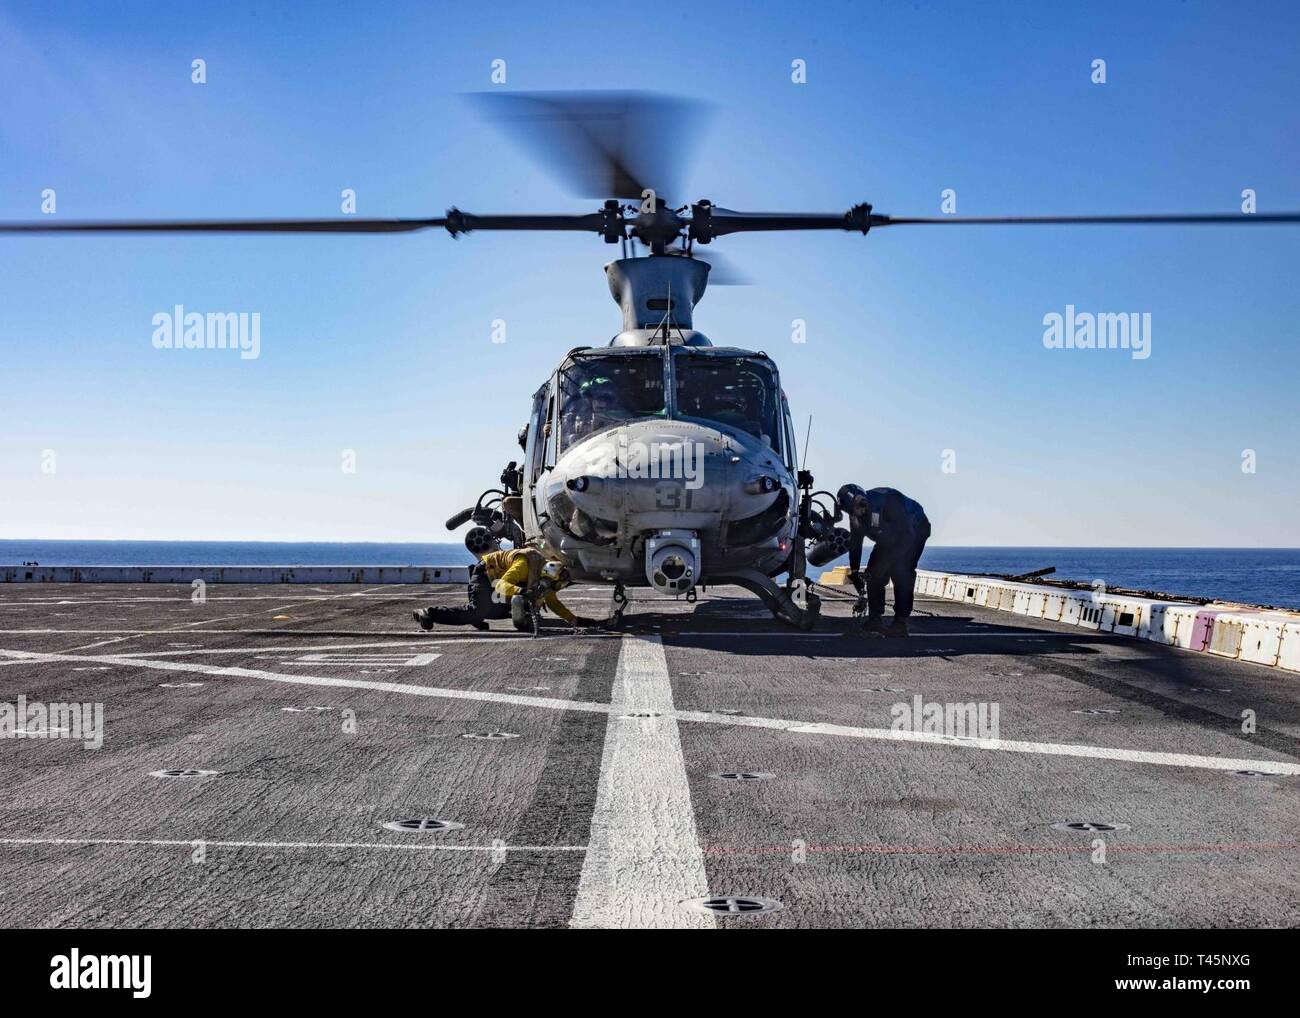 MEDITERRANEAN SEA (Mar. 5, 2019) Sailors secure a UH-1Y Huey helicopter assigned to the “Black Knights” of Marine Medium Tiltrotor Squadron (VMM) 264 (Reinforced) to the flight deck of the San Antonio-class amphibious transport dock ship USS Arlington (LPD 24), Mar. 5, 2019. Arlington is on a scheduled deployment as part of the Kearsarge Amphibious Ready Group in support of maritime security operations, crisis response and theater security cooperation, while also providing a forward naval presence. Stock Photo